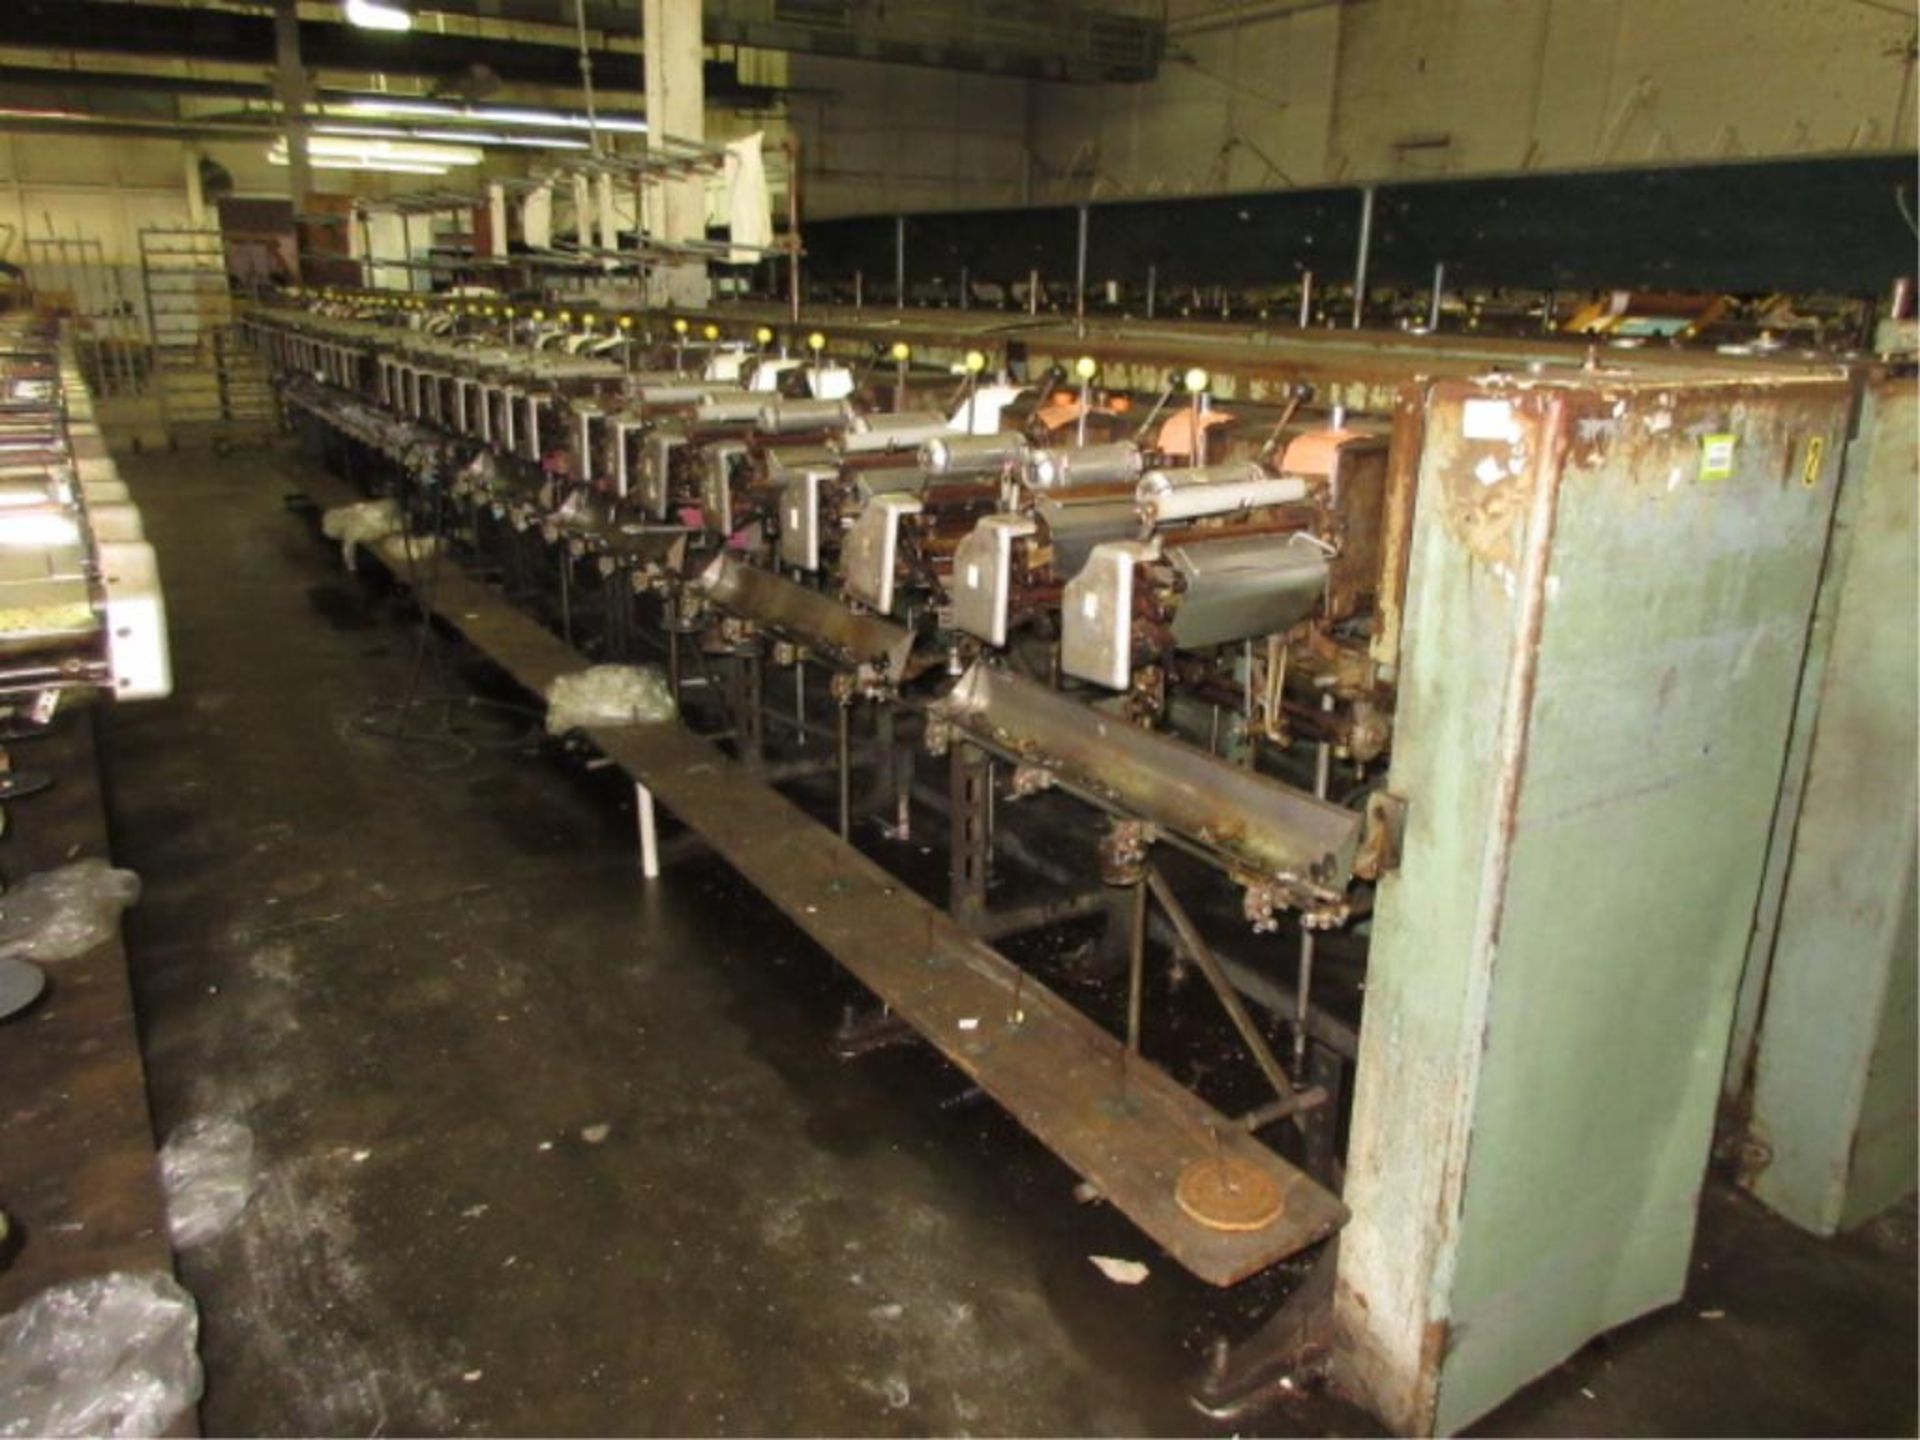 Schweiter Precision Winder, 32 position, said to be in running condition. SN# 1542/69. HIT# 2179281.